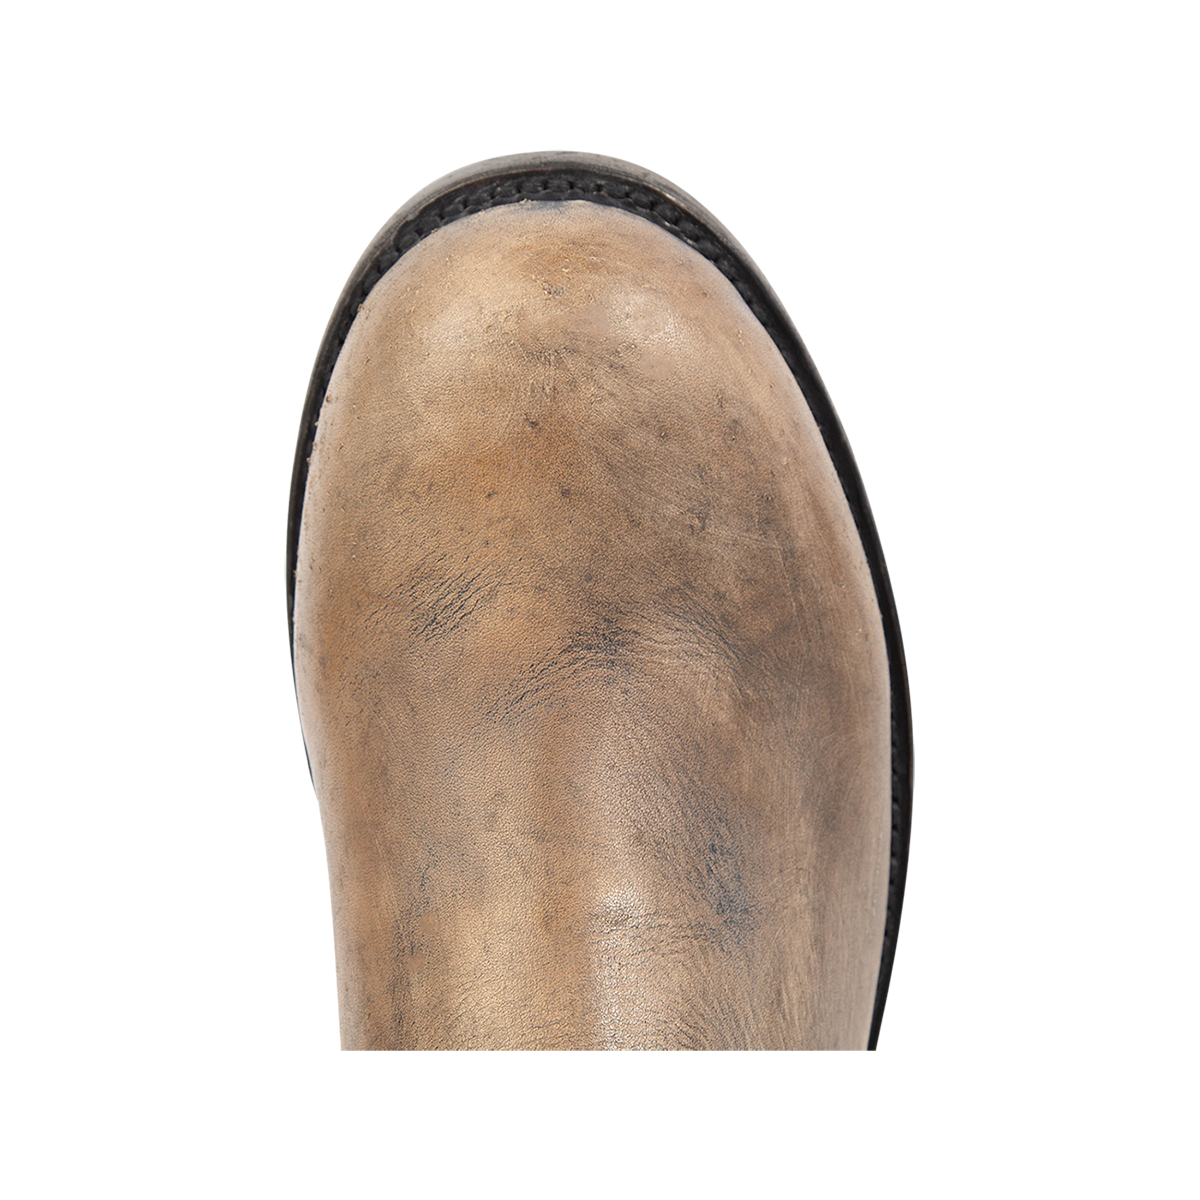 Top view showing a rounded toe on FREEBIRD men's Charles stone leather boot